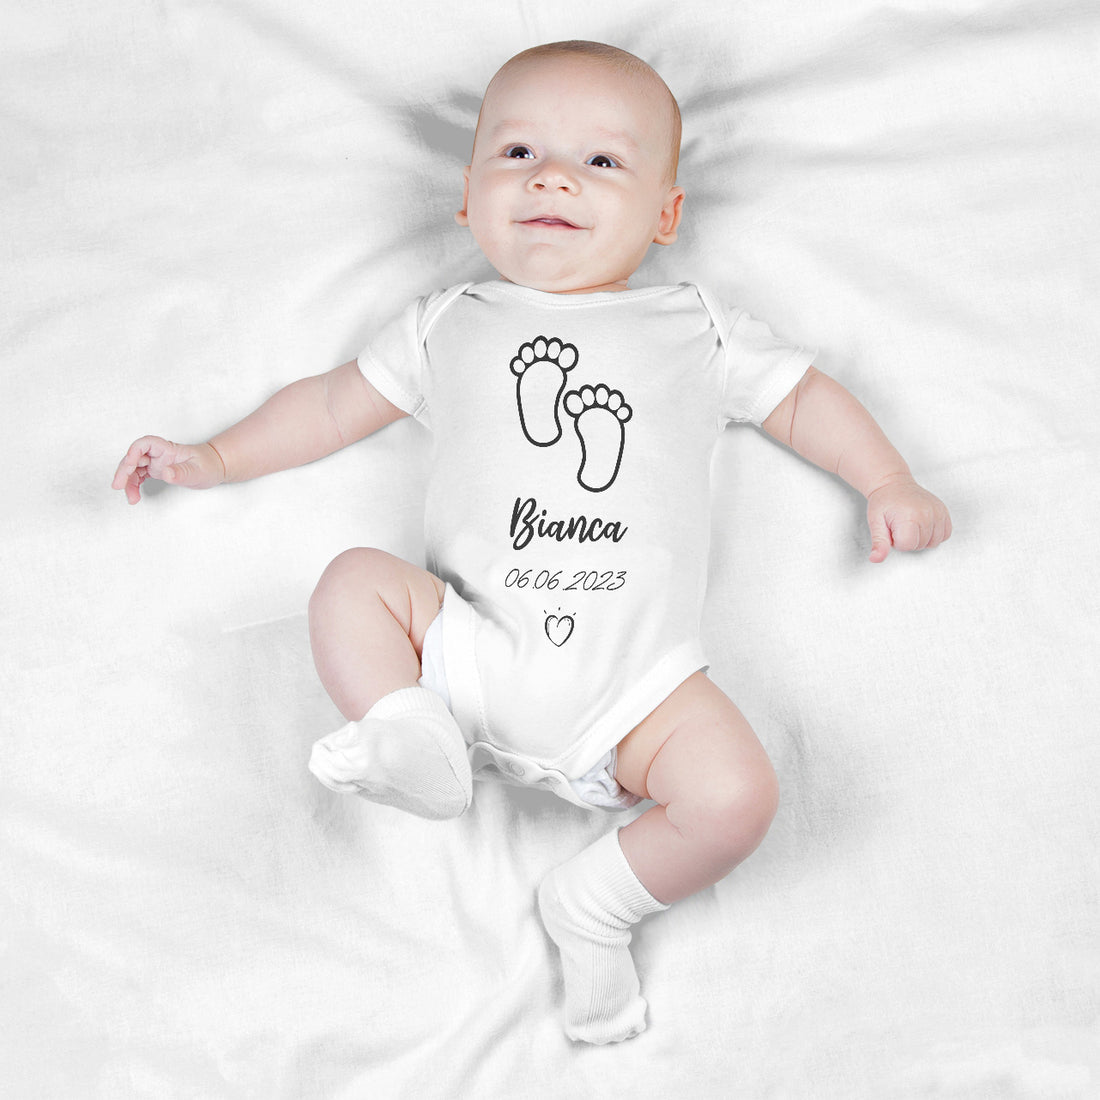 Personalized Bodysuit Onesie For Newborn Baby Feet With Name And Date